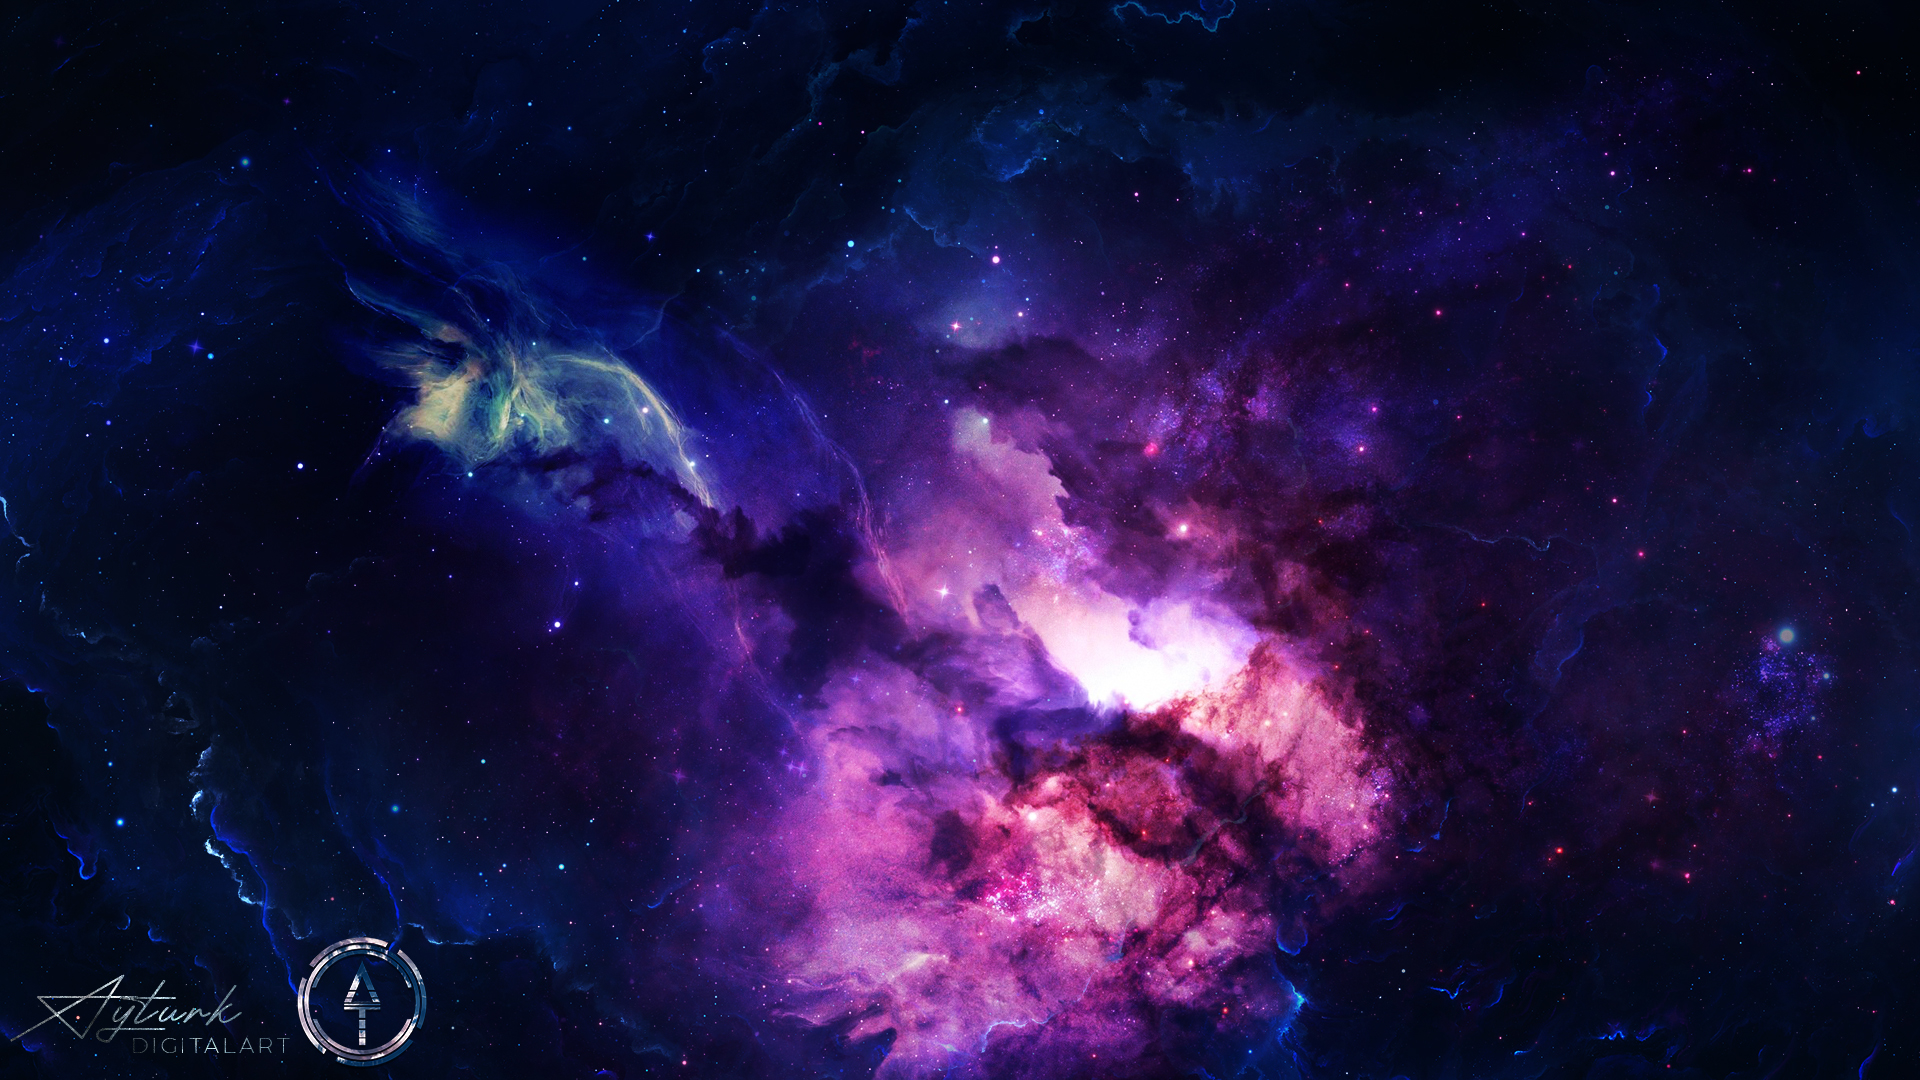 Wallpaper : galaxy, spacescapes, space clouds, stars, Hubble, NASA, photo manipulation, digital, artwork, planet, colorful 1920x1080